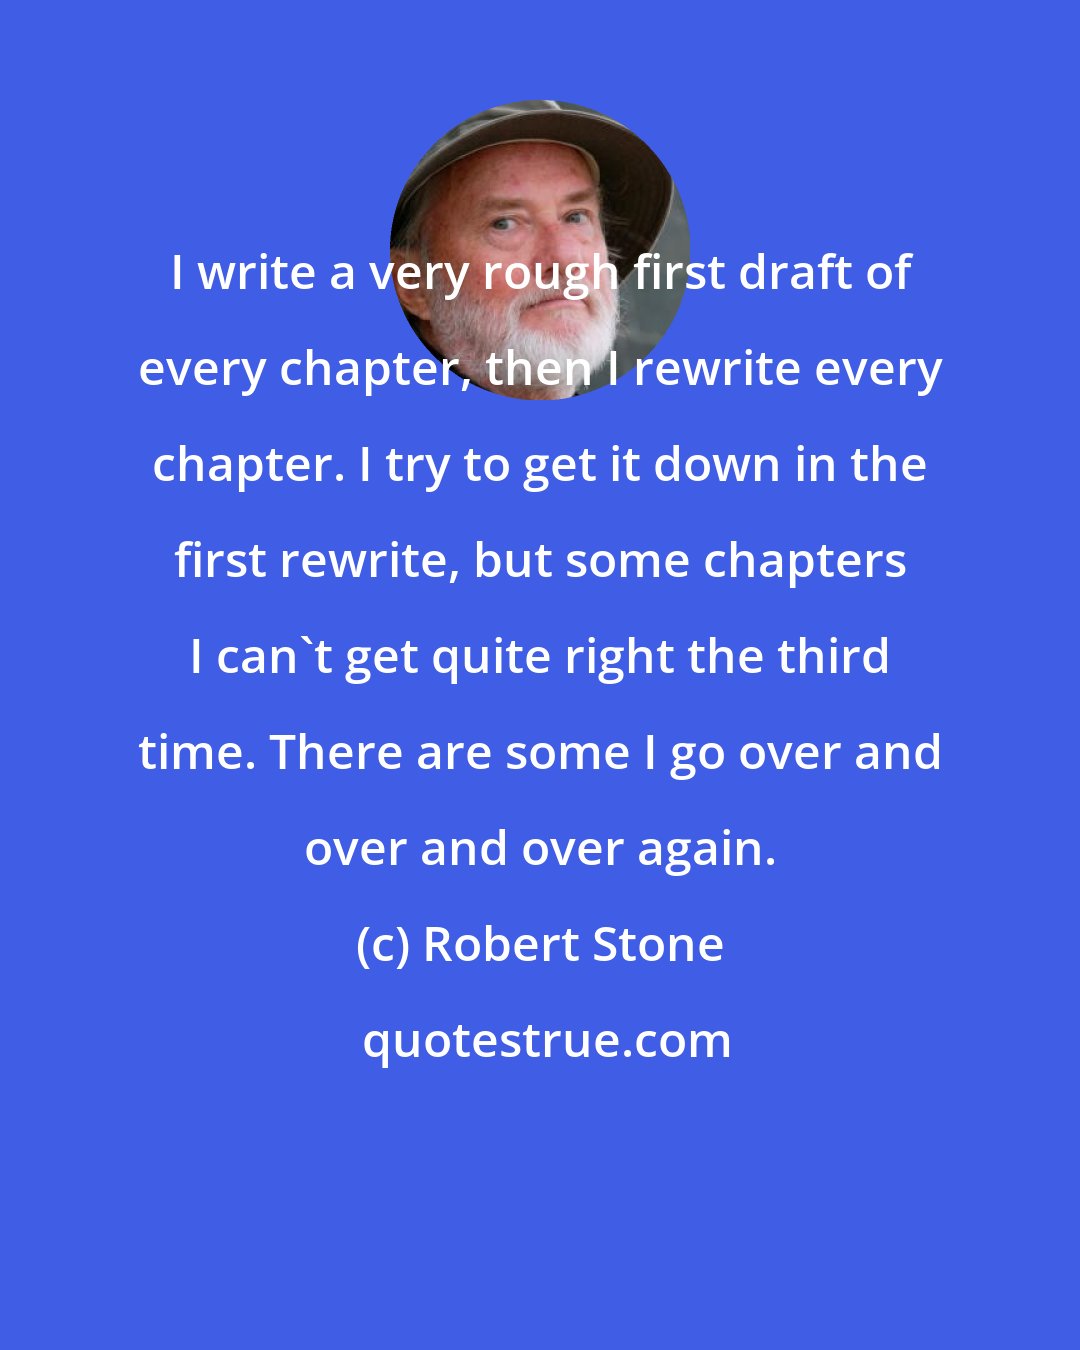 Robert Stone: I write a very rough first draft of every chapter, then I rewrite every chapter. I try to get it down in the first rewrite, but some chapters I can't get quite right the third time. There are some I go over and over and over again.